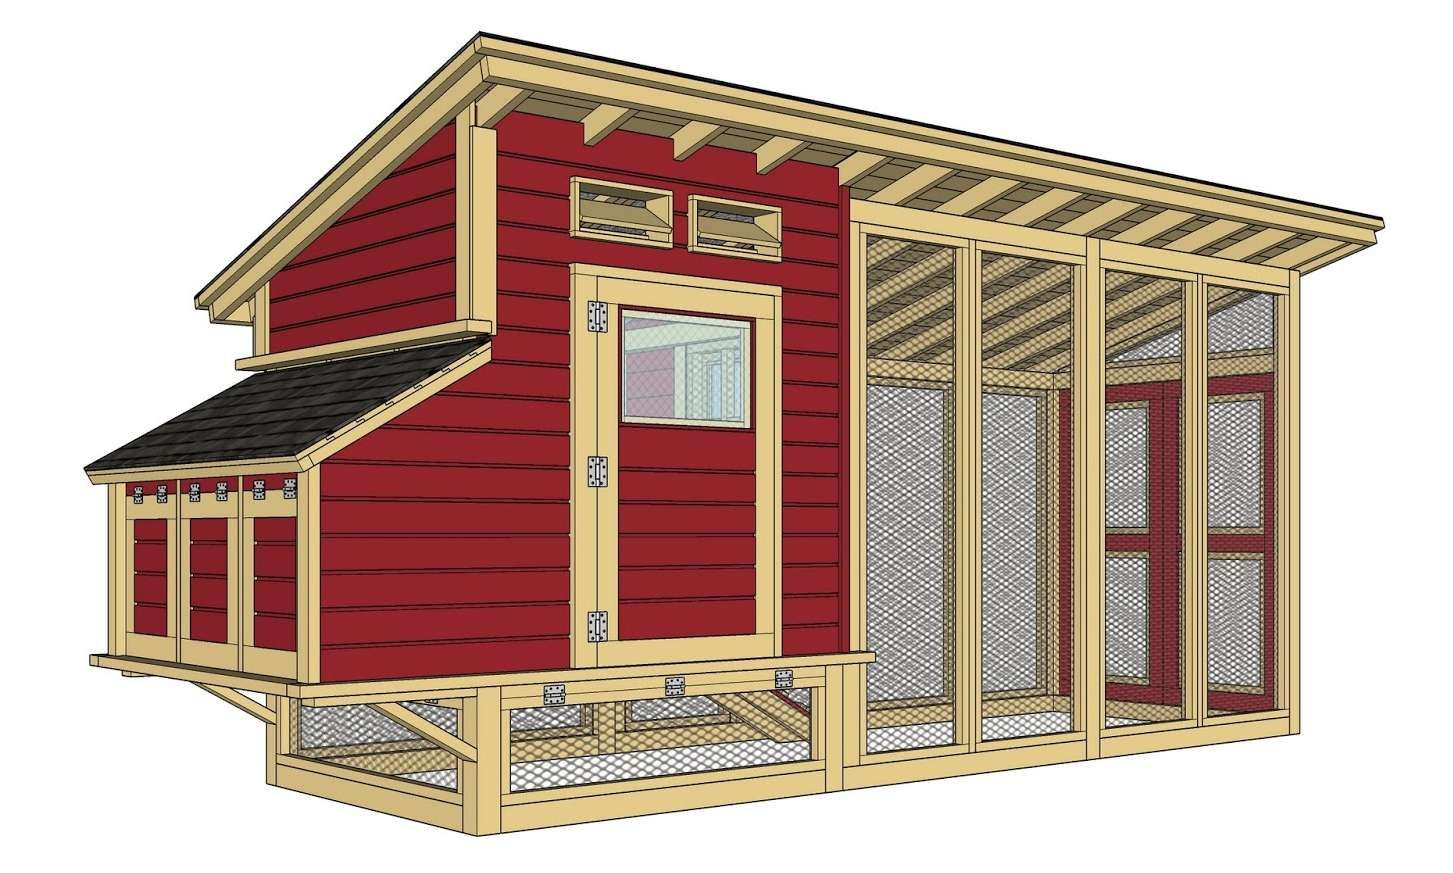 A Small Chicken Coop With The Door Open And Windows On It&amp;#039;S Side, In avec Plan Poulailler Pdf Gratuit